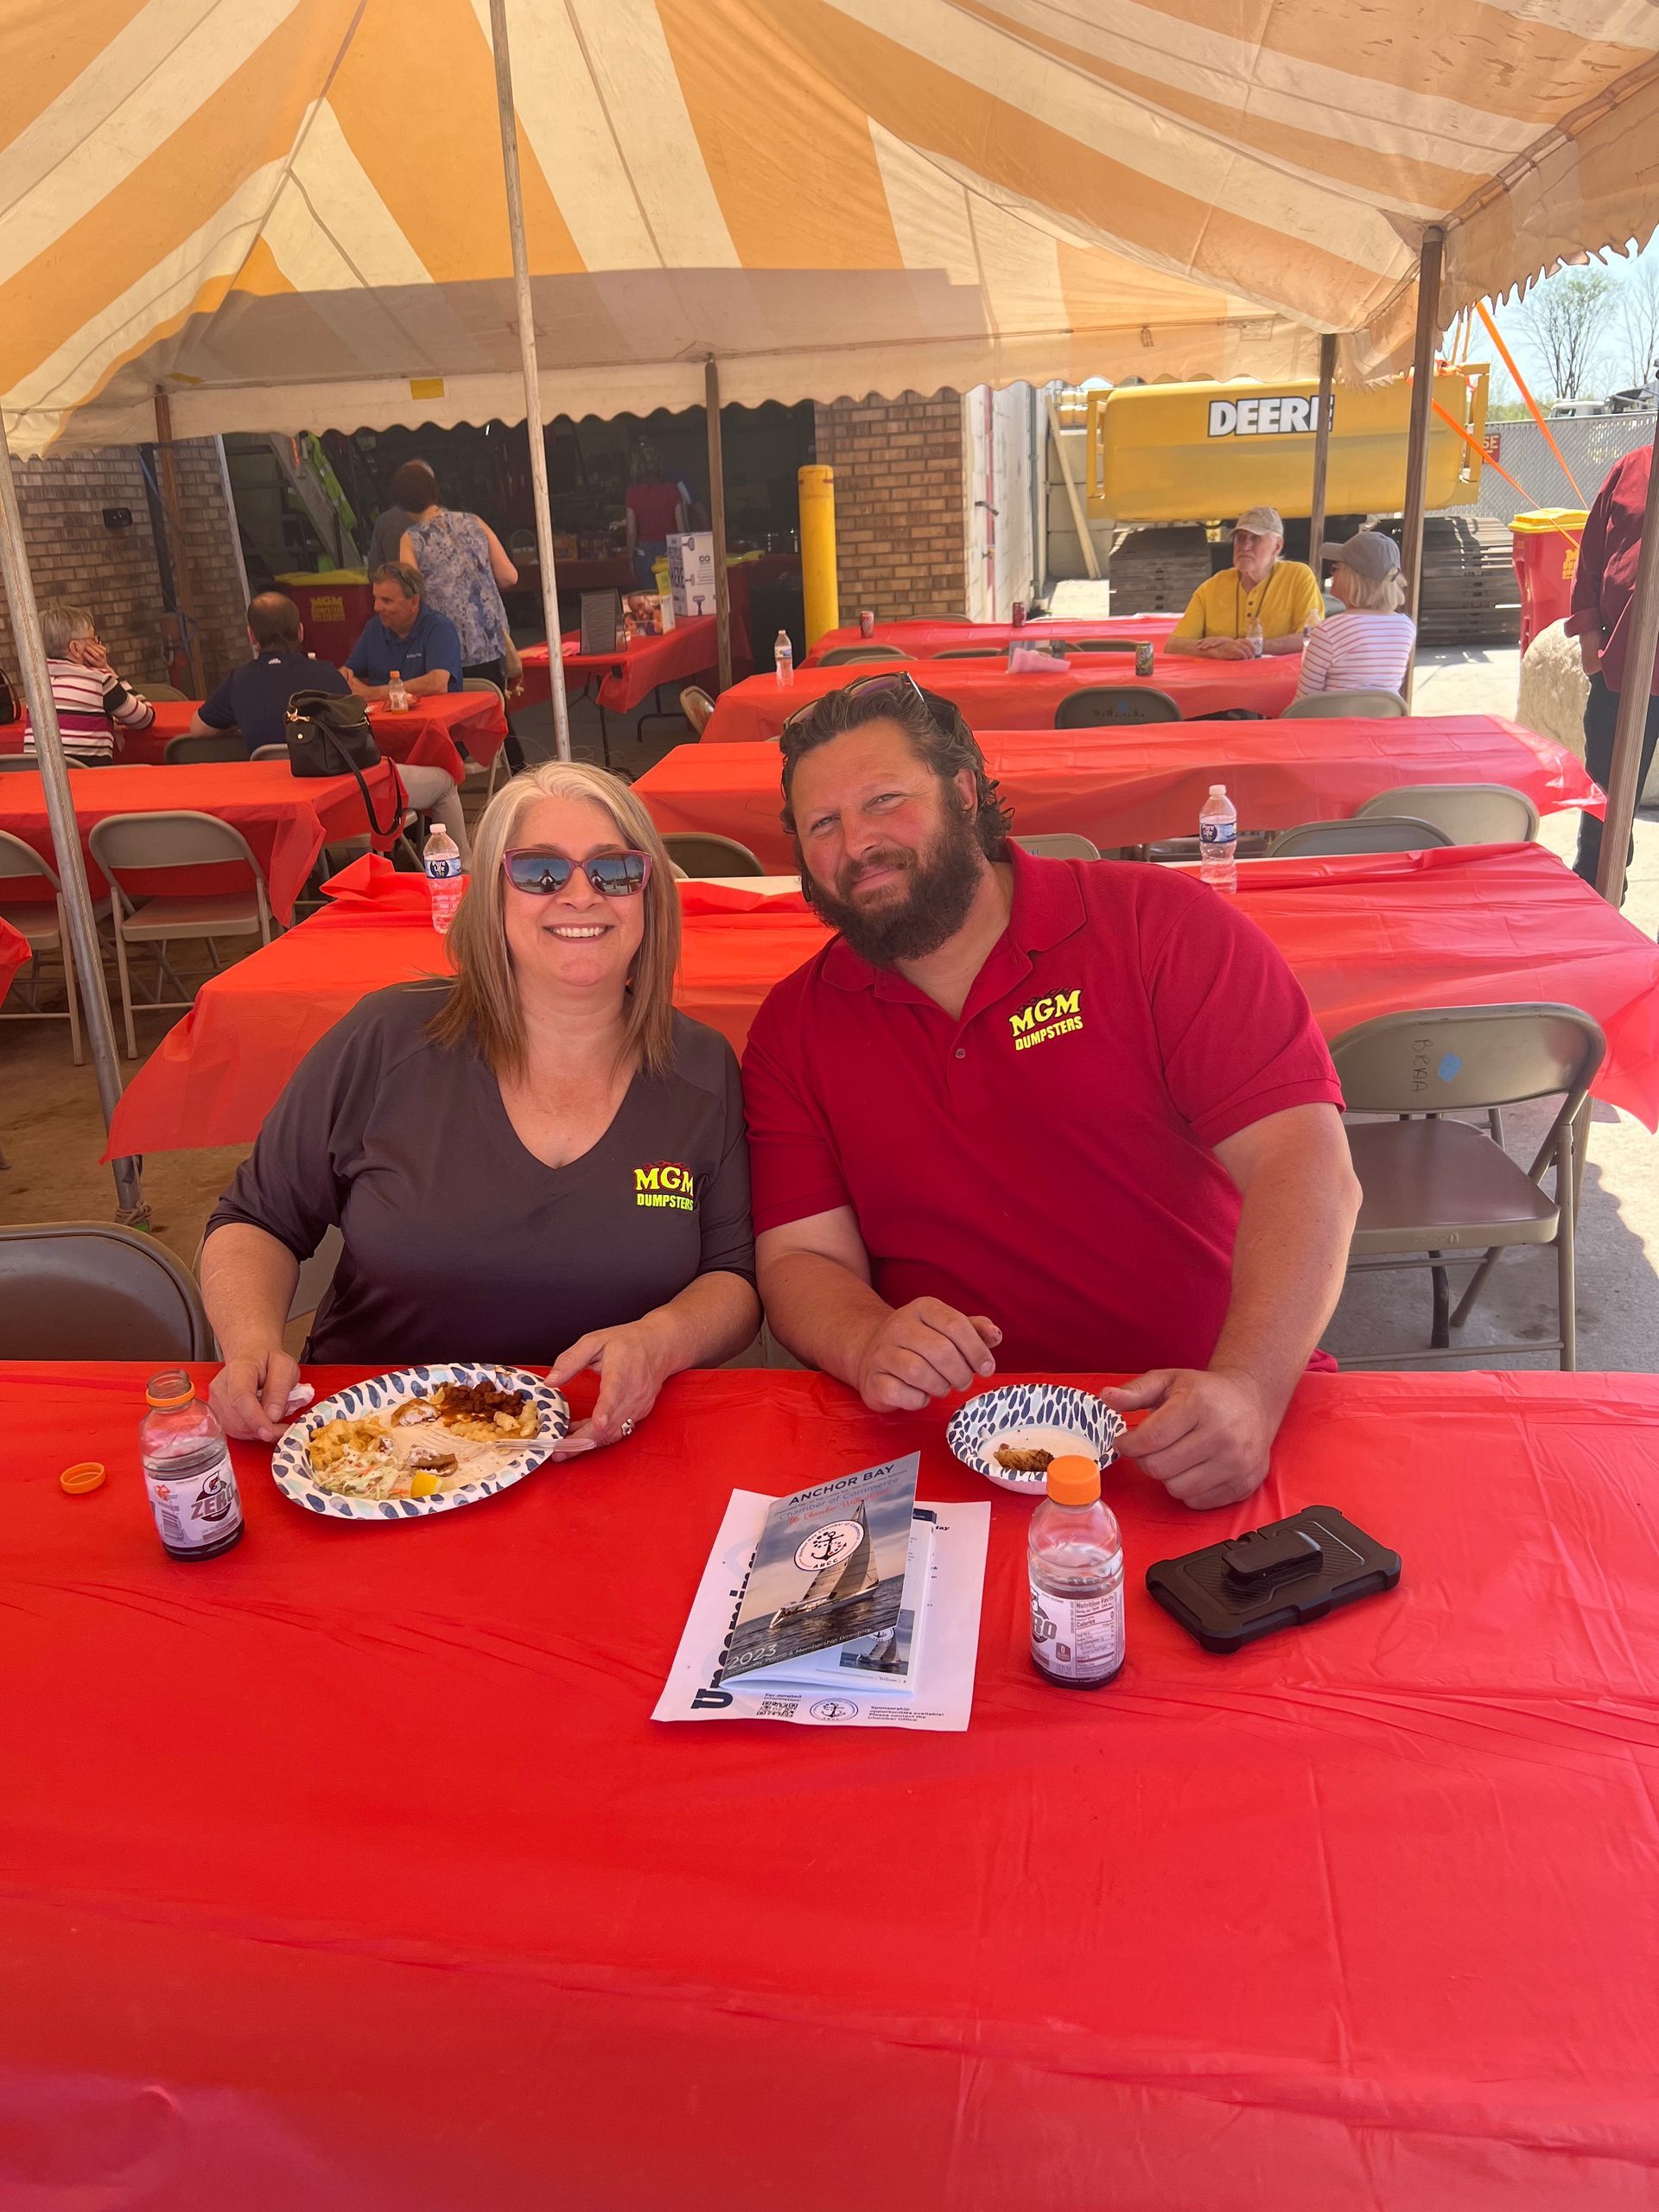 A man and a woman are sitting at a table under a tent